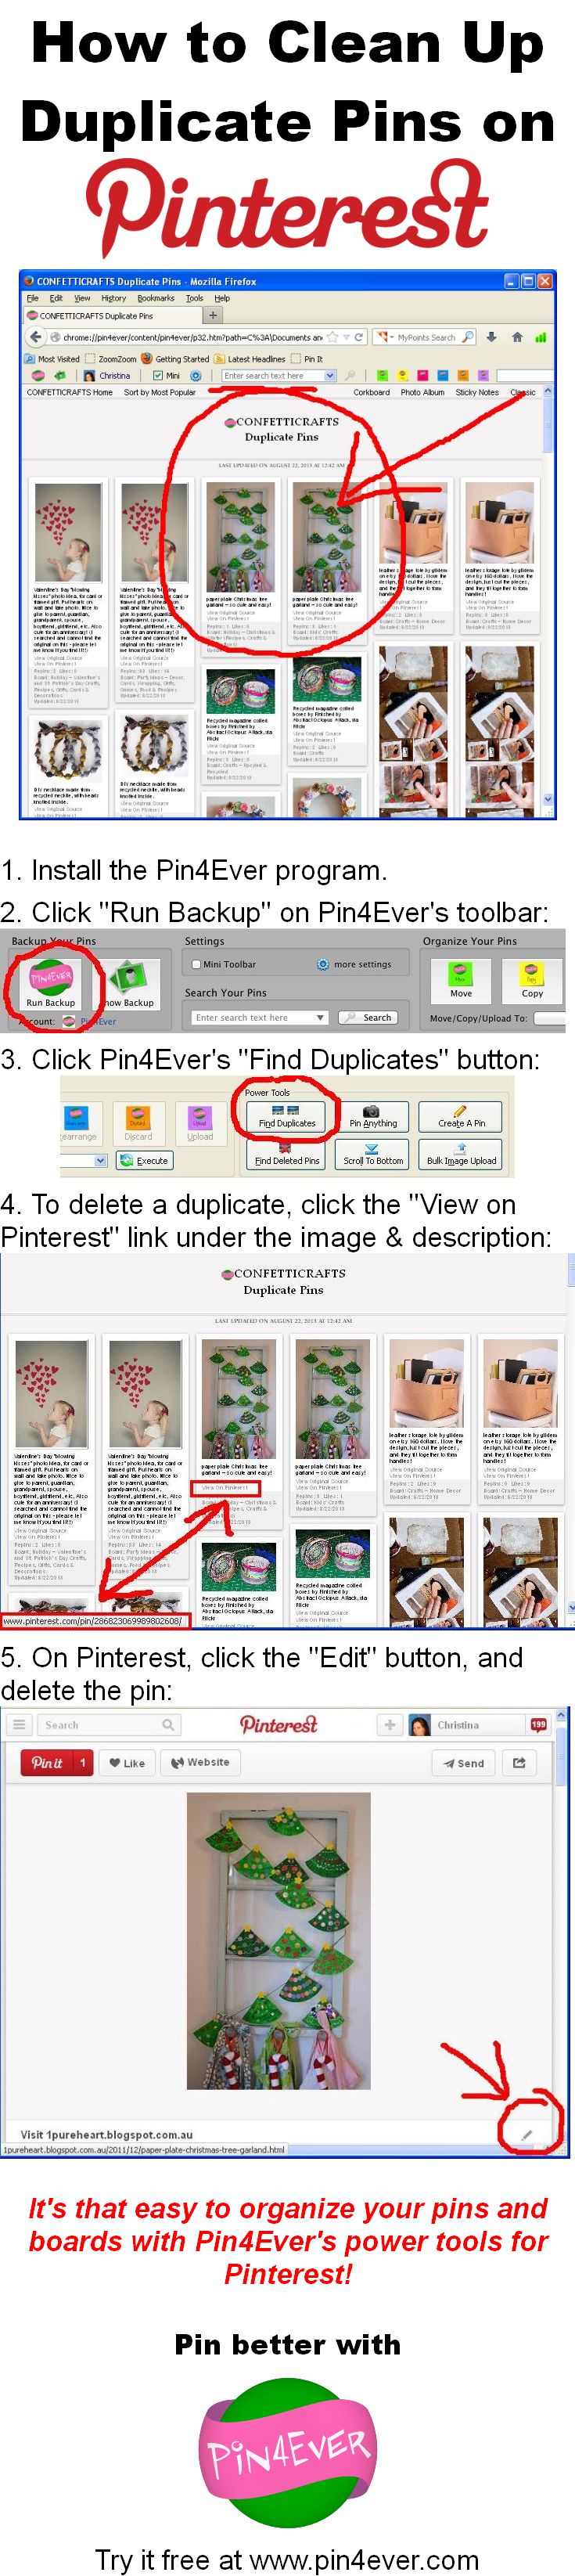 How to Clean Up Duplicate Pins on Pinterest, using Pin4Ever's "Find Duplicates" feature! Organize your boards the fast and easy way with our Pinterest power tools. Try them free for a week at www.pin4ever.com